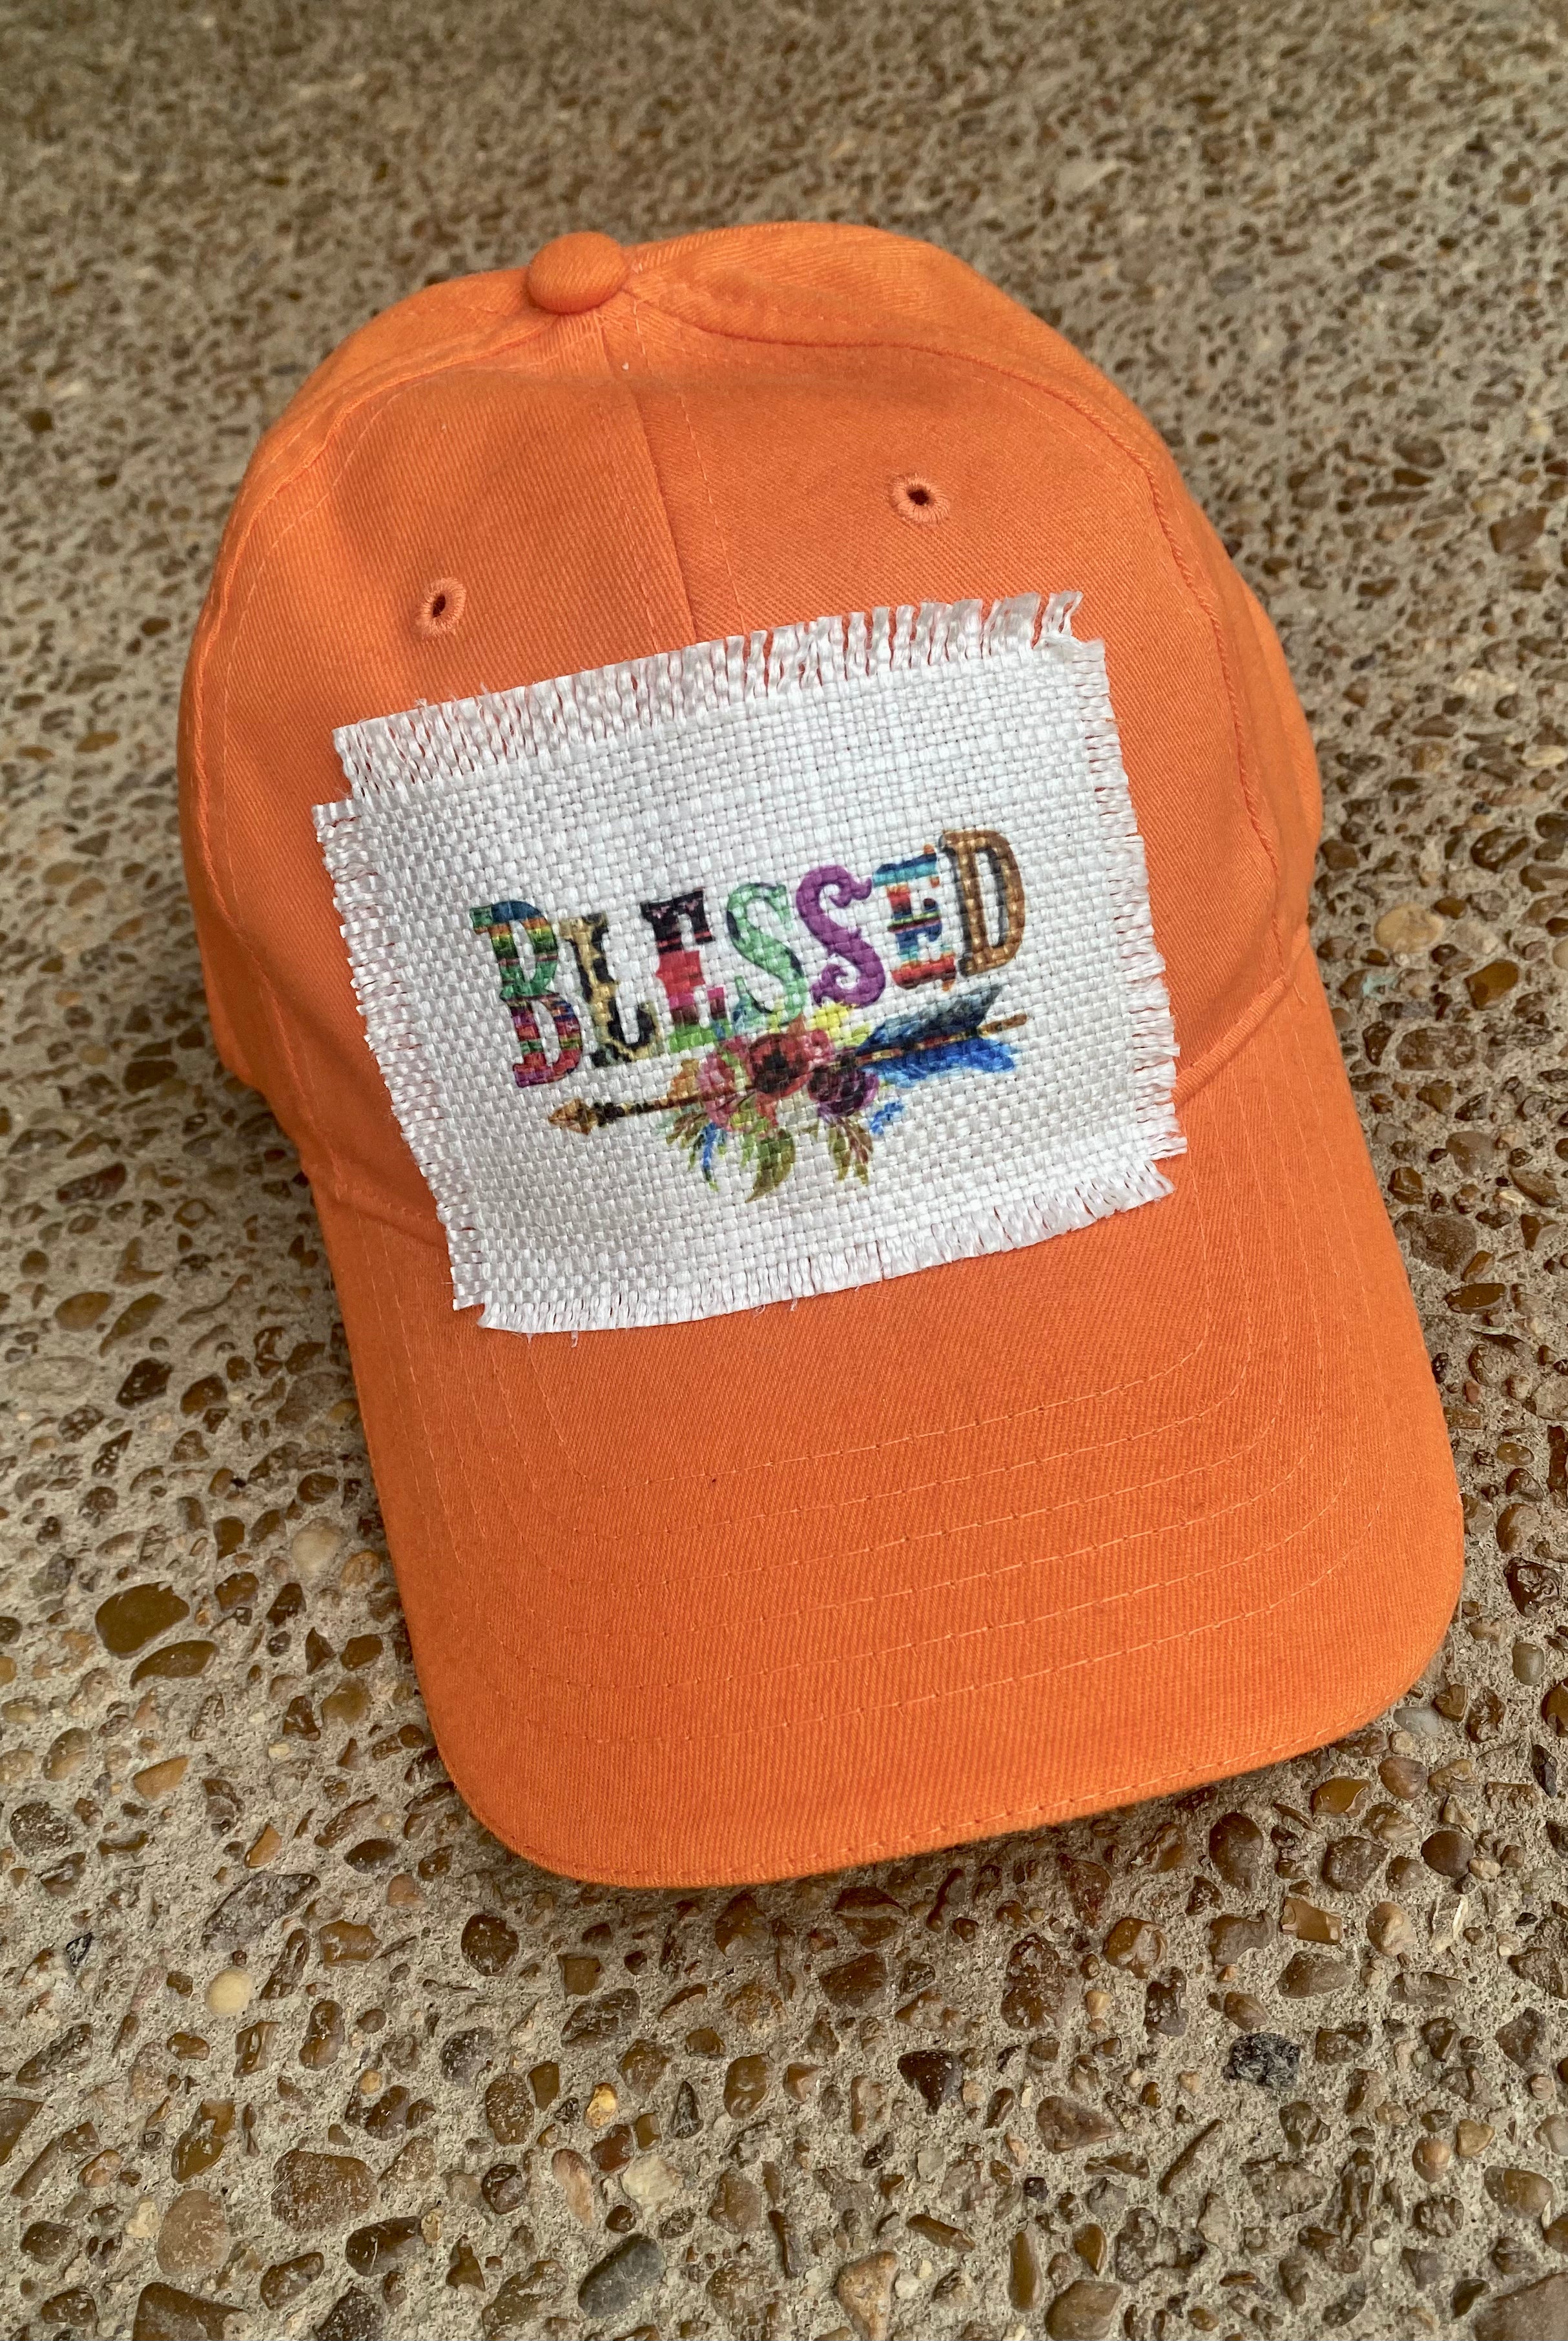 Blessed Patch Distressed Ball Cap - Ball Cap -Jimberly's Boutique-Olive Branch-Mississippi